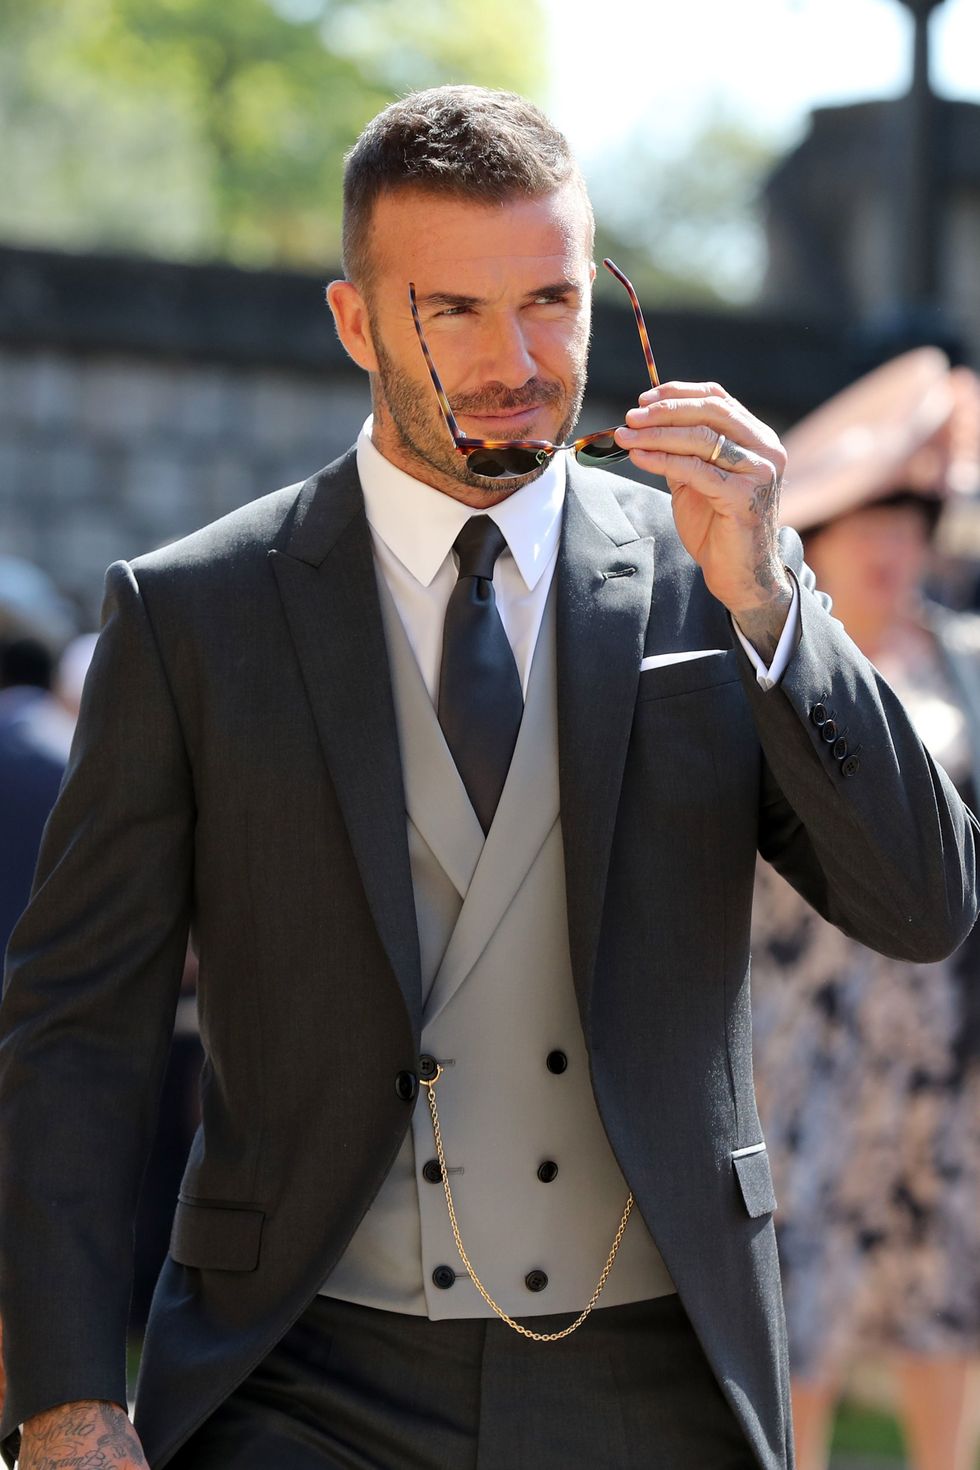 windsor, united kingdom   may 19  david beckham arrives at st georges chapel at windsor castle before the wedding of prince harry to meghan markle on may 19, 2018 in windsor, england photo by gareth fuller   wpa poolgetty images